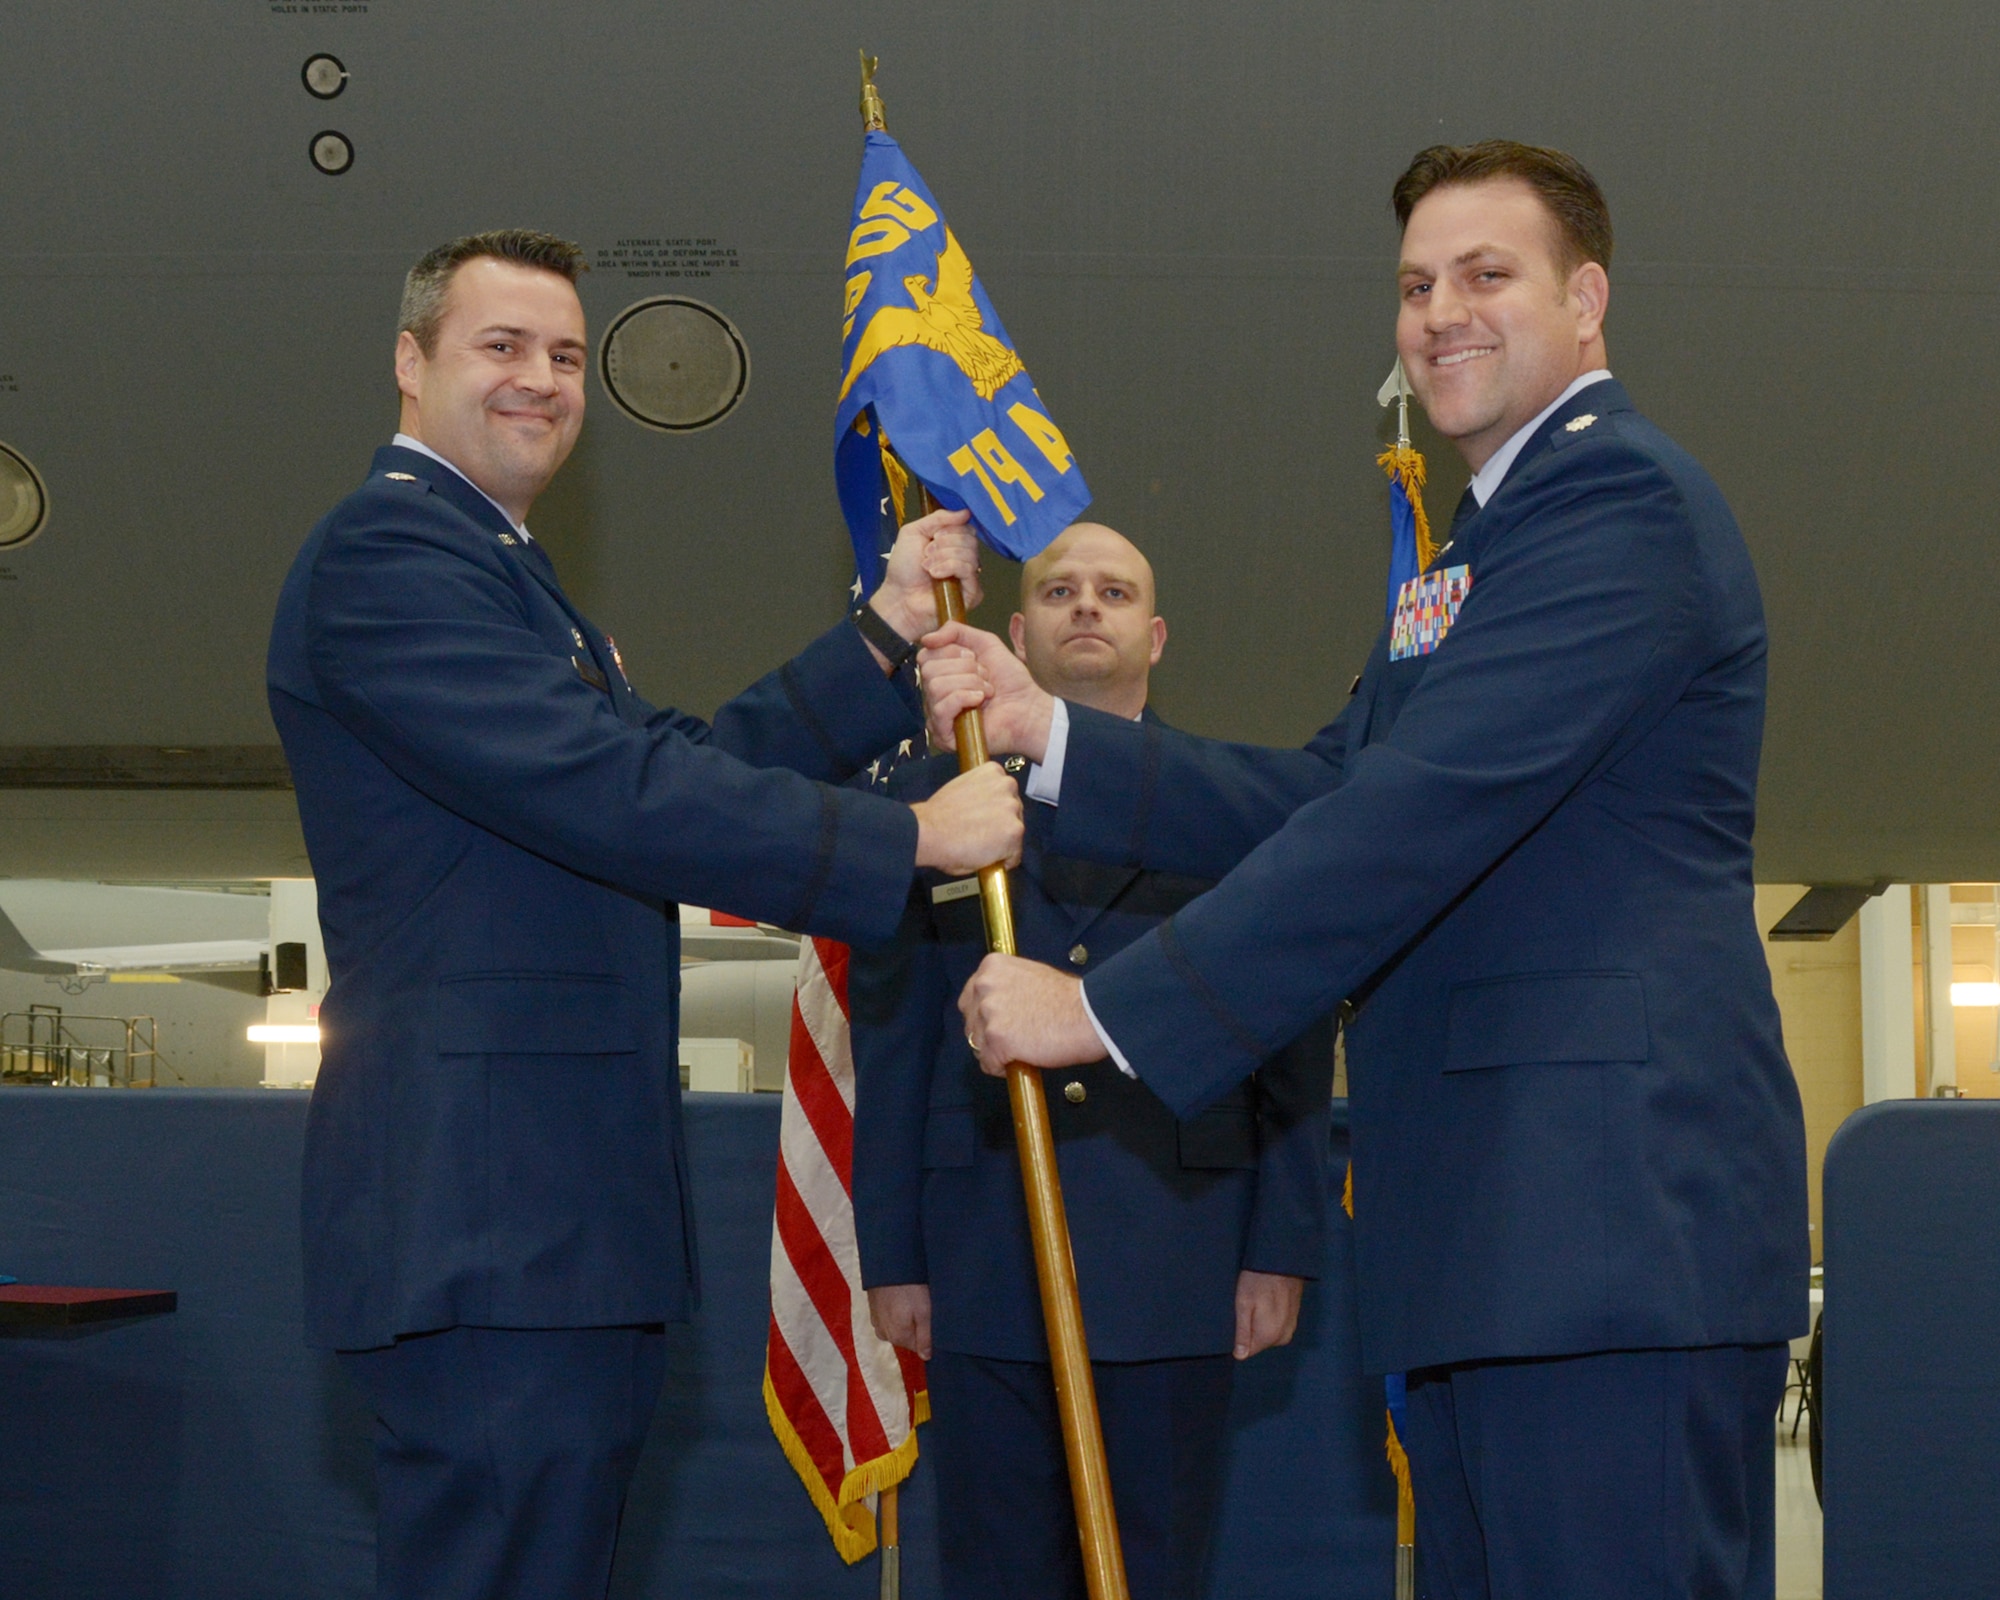 U.S. Air Force Lt. Col. Joseph D. Wall receives a guidon from Lt. Col. Daniel Stout, acting 349th Operations Group Commander during a change of command ceremony for the 79th Air Refueling Squadron at Travis Air Force Base, Calif., Jan. 7, 2017.  Wall takes command of the Air Force Reserve KC-10 Extender squadron as one of only a handful of active-duty officers in command of reserve units.  He previously served as the director of operations for the 821st Contingency Response Group, also at Travis.  (U.S. Air Force photo by Senior Airman Chris Massey)